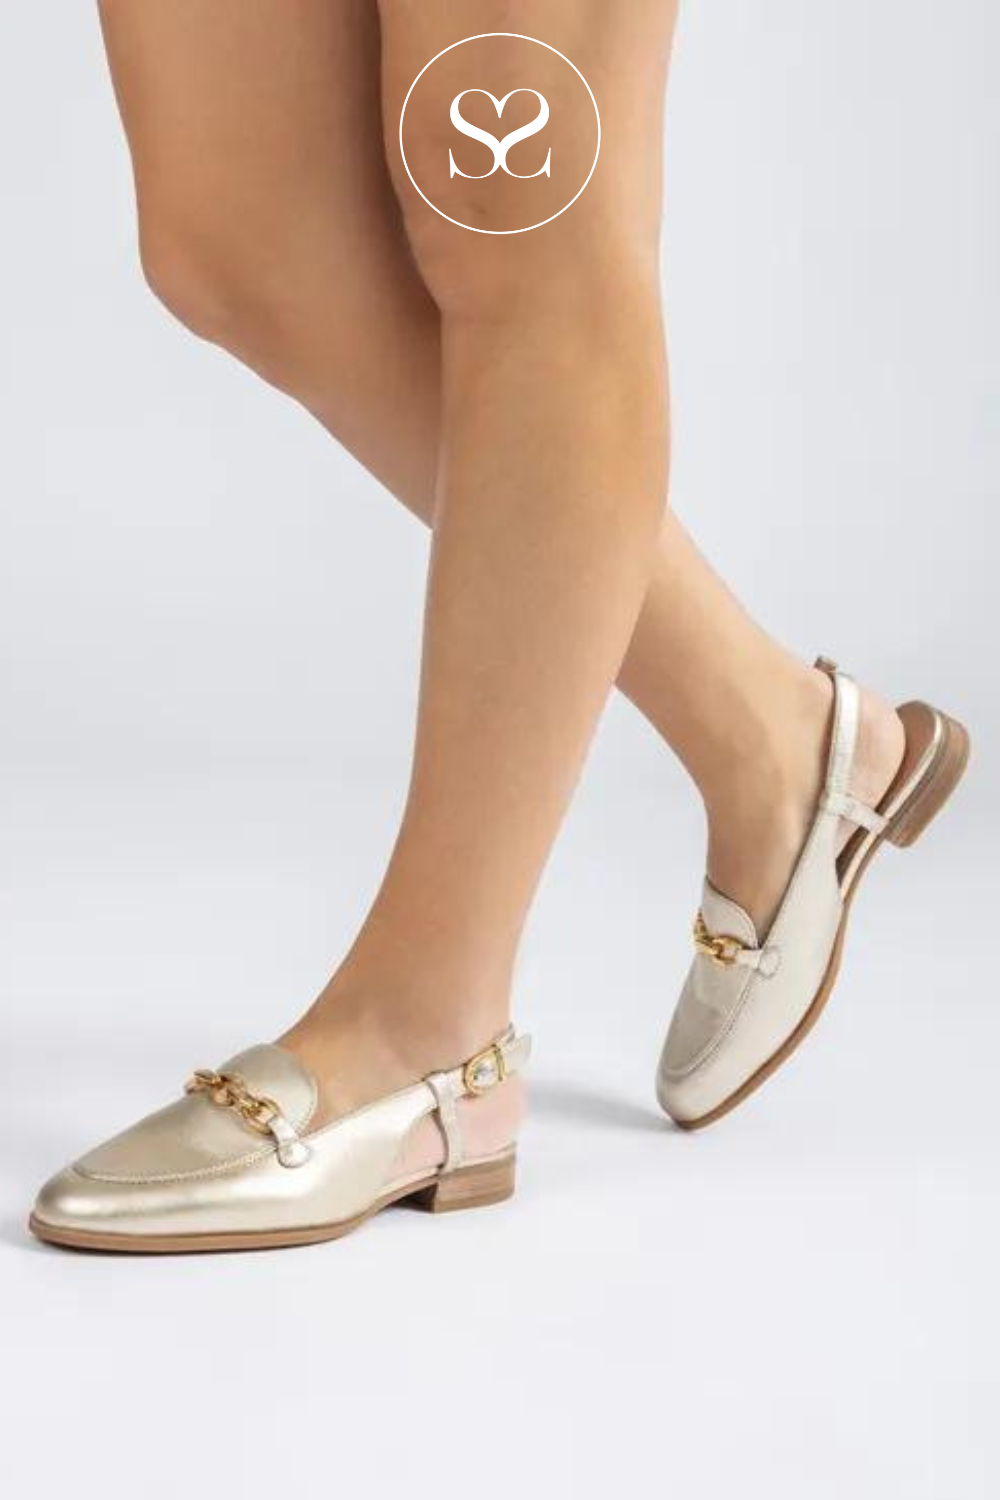 UNISA DEAN GOLD LEATHER SLINGBACK FLAT LOAFERS WITH ADJUSTABLE STRAP